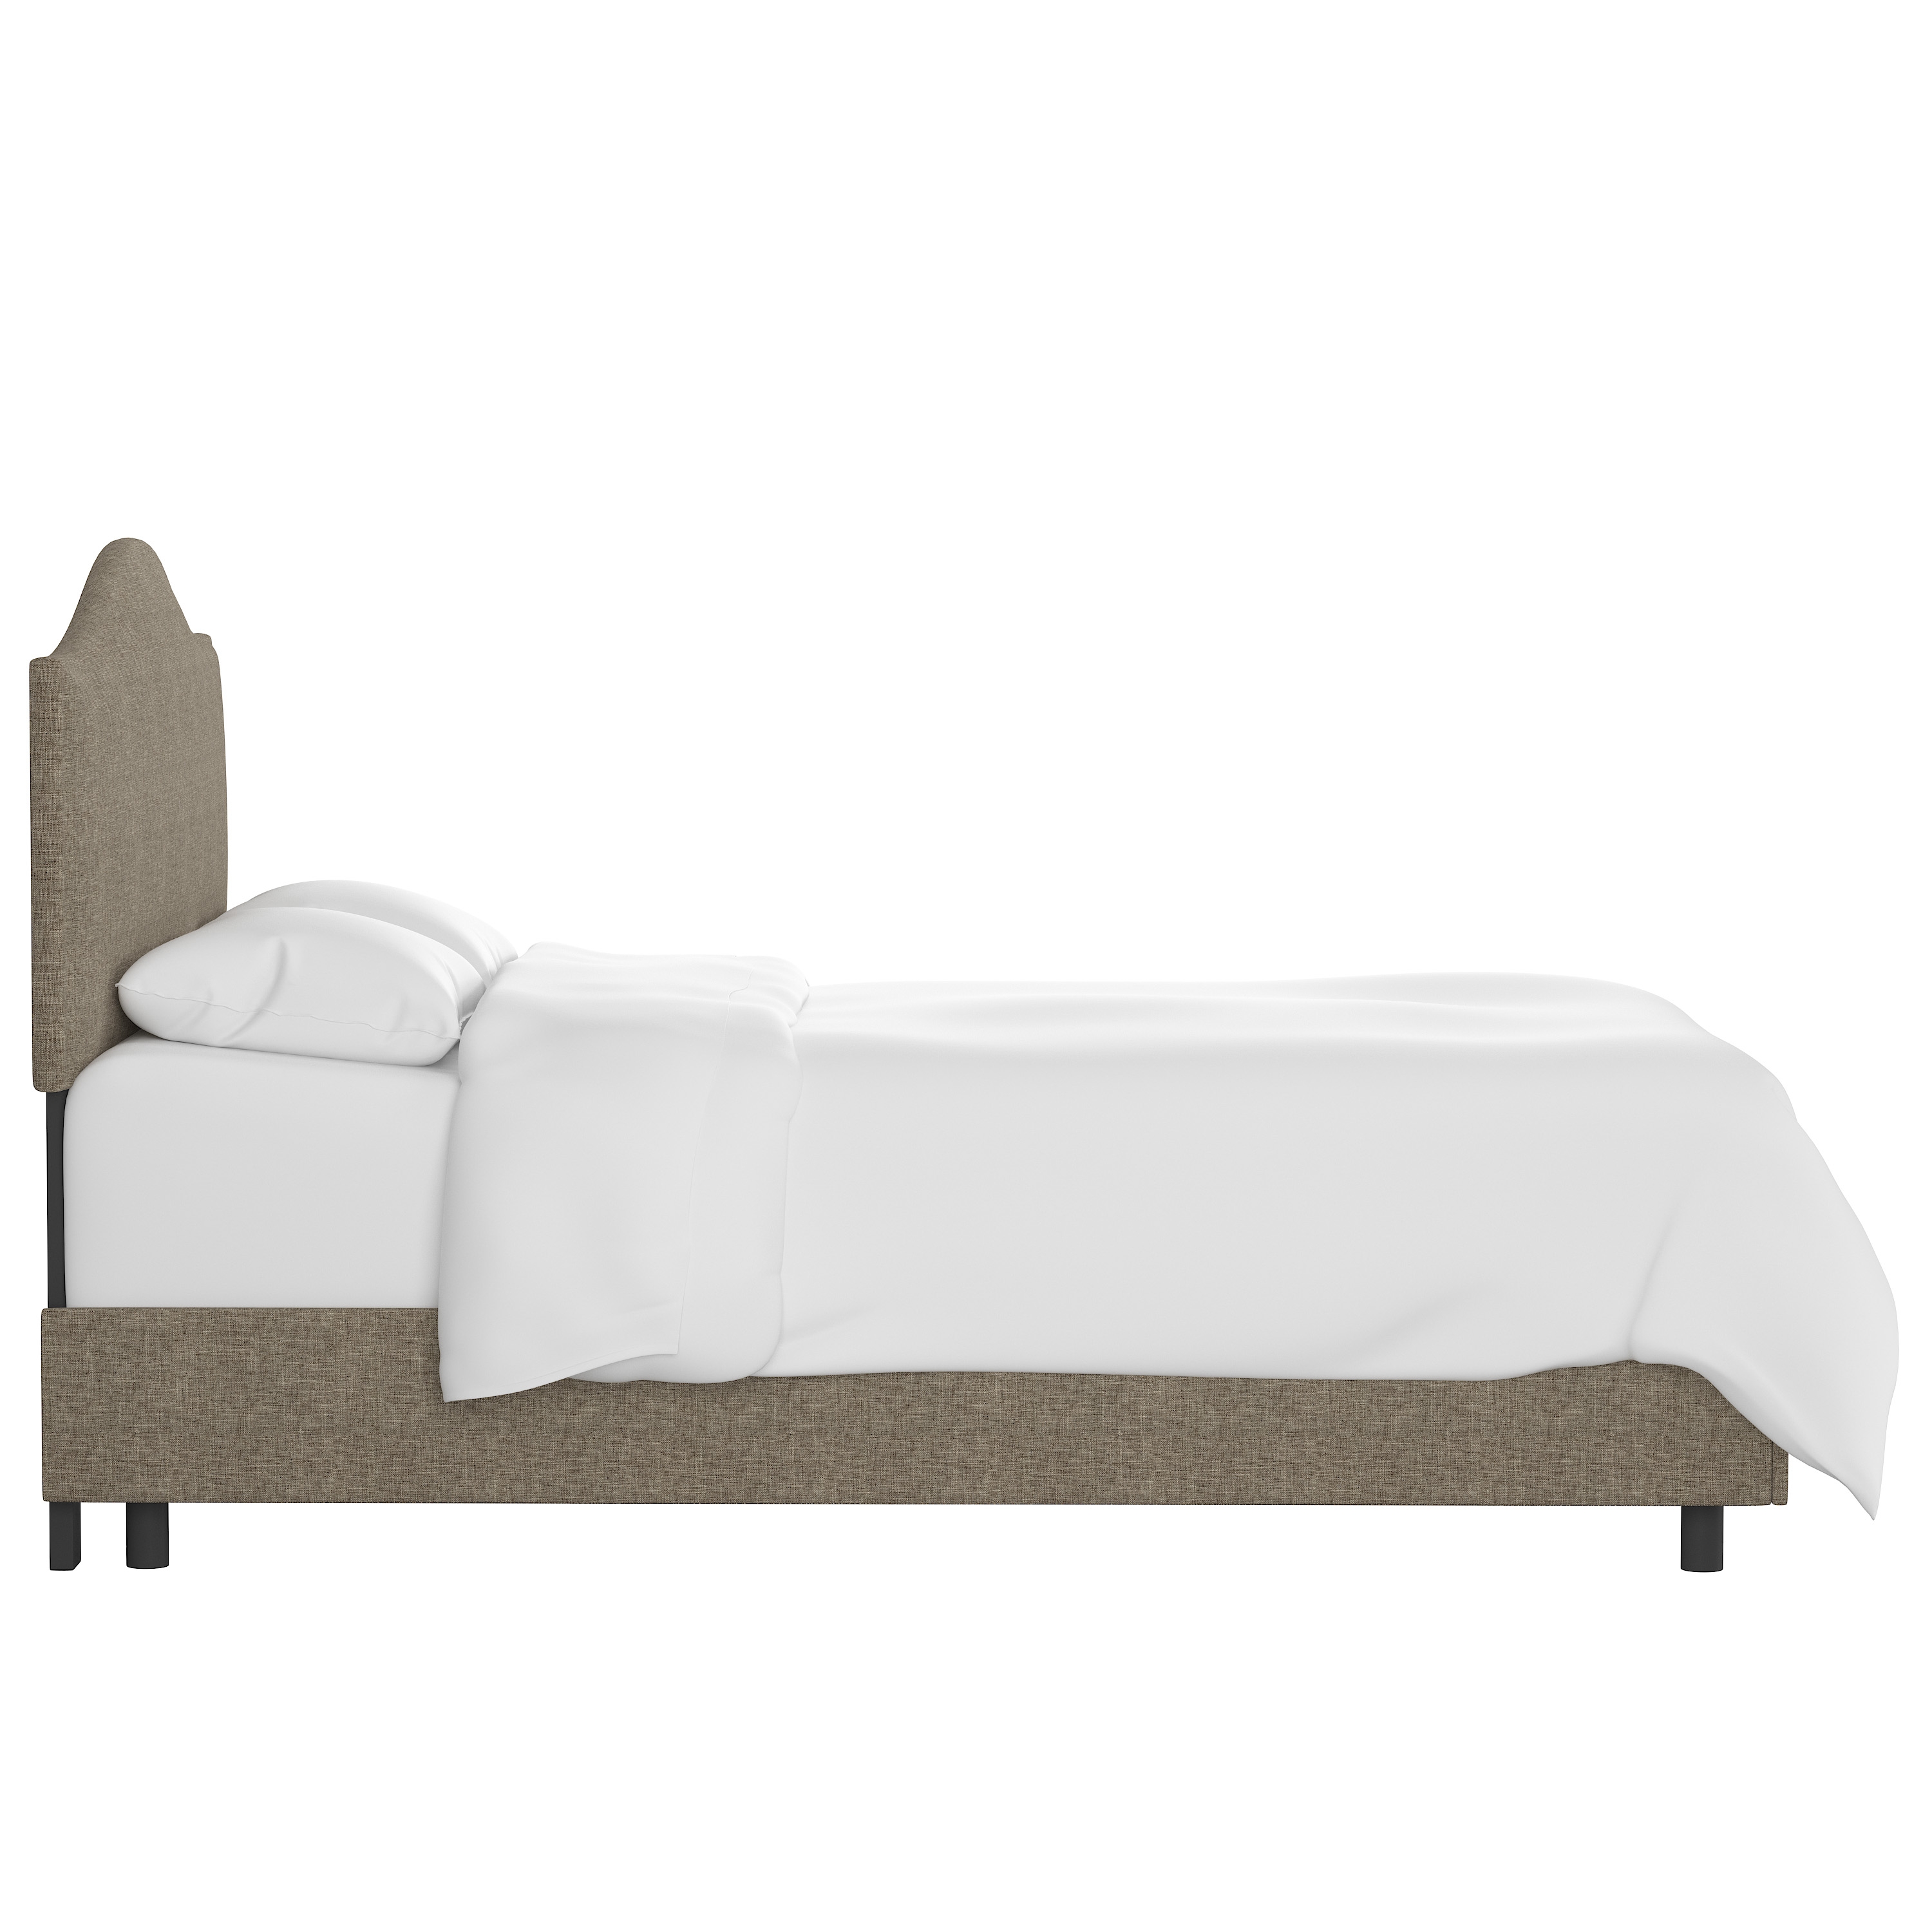 King Kenmore Bed in Zuma Linen - Image 2